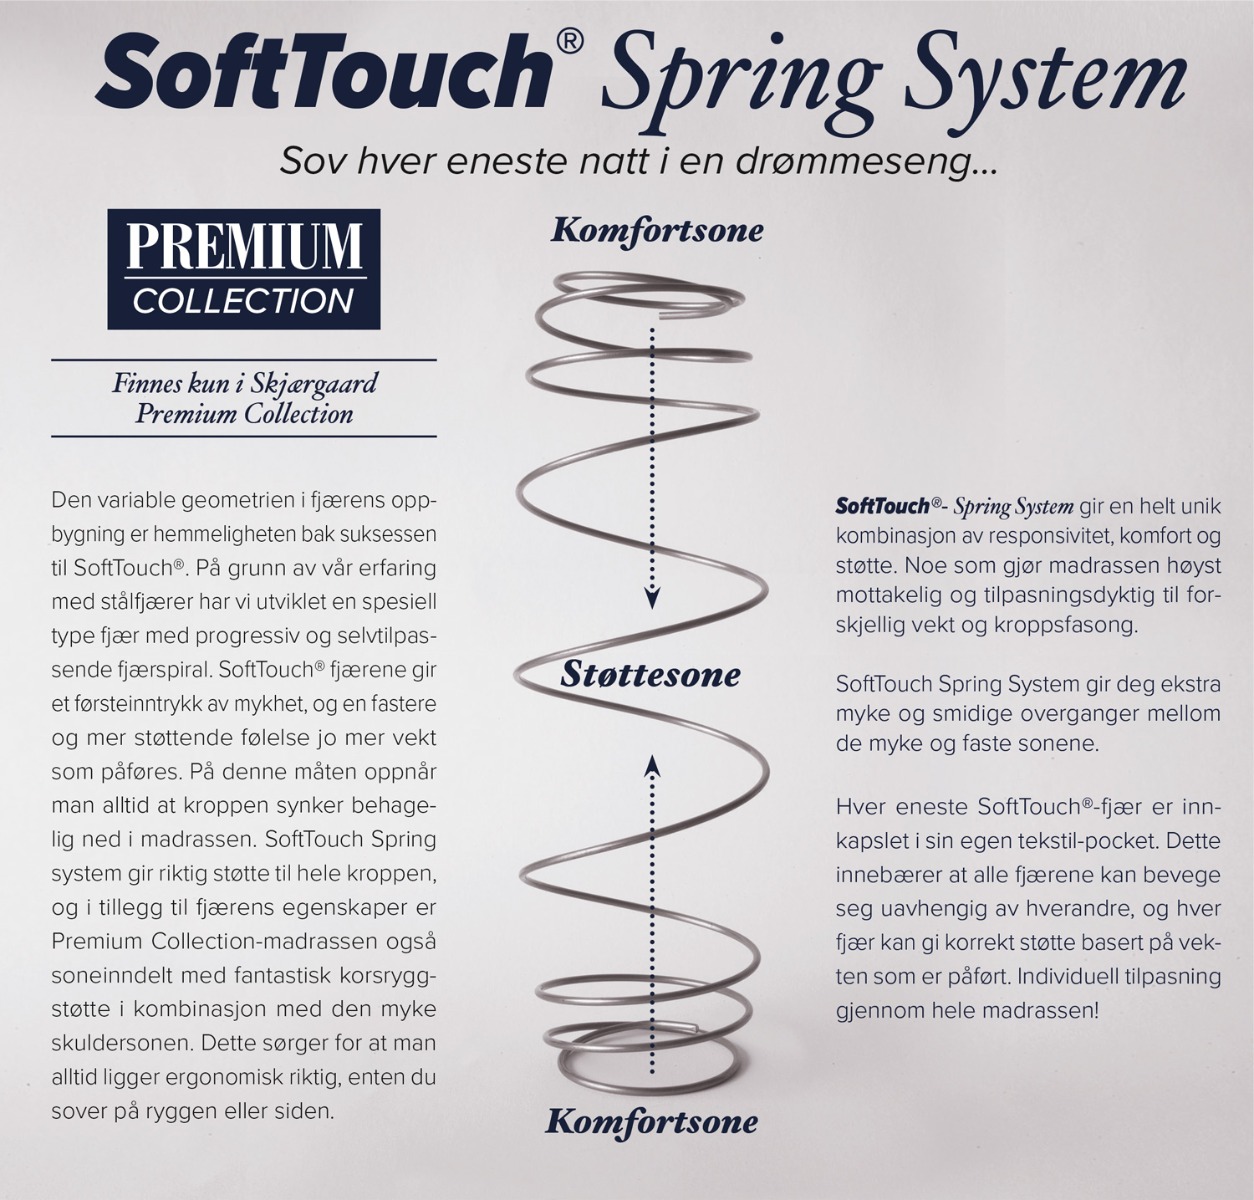  SoftTouch Spring system